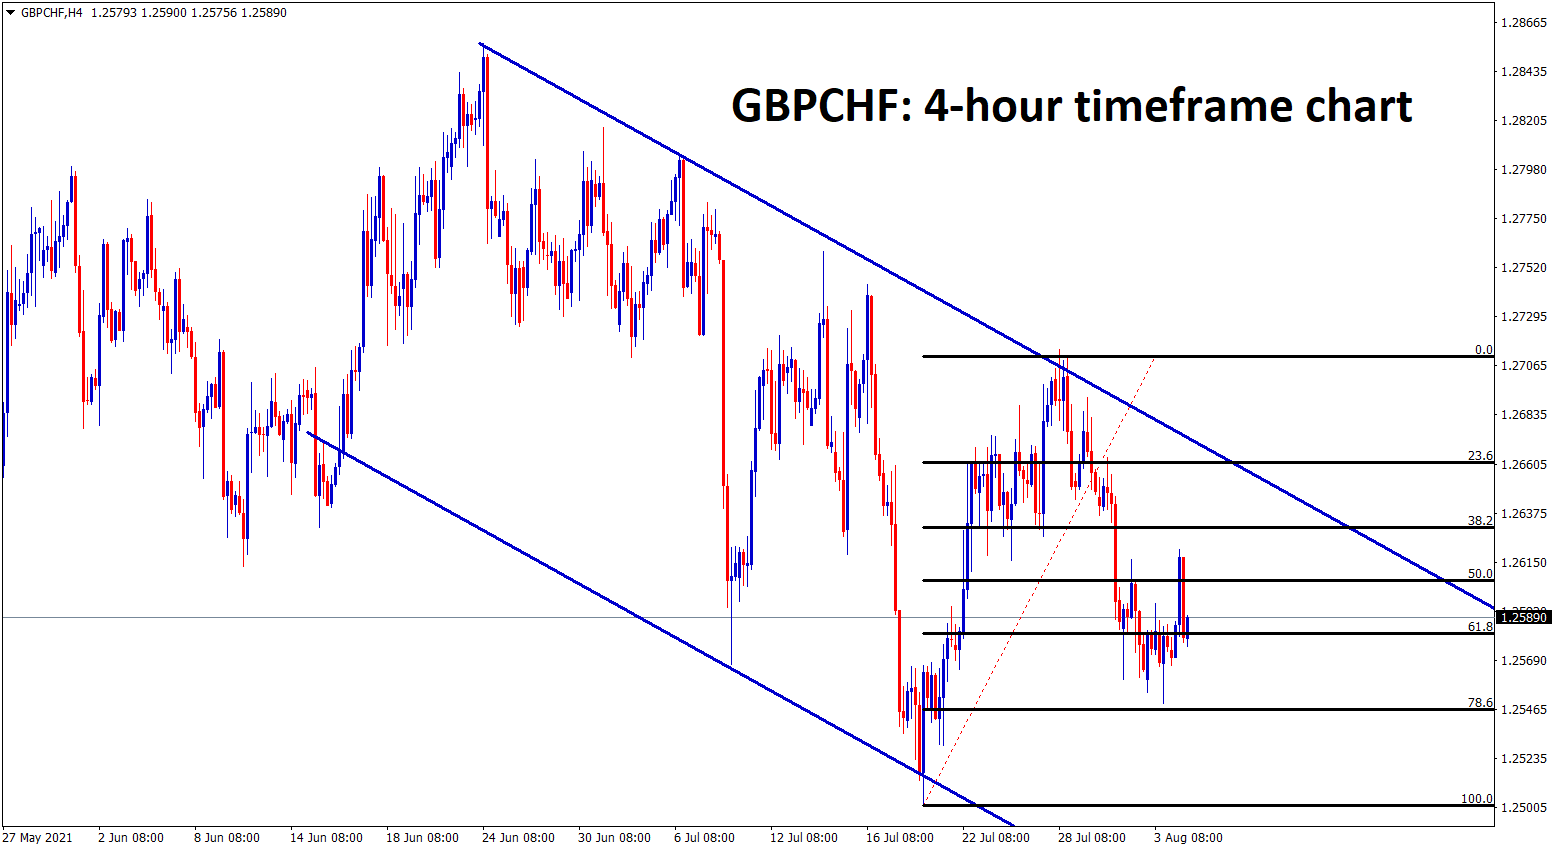 GBPCHF has retraced until 78 from the recent high in an descending channel range